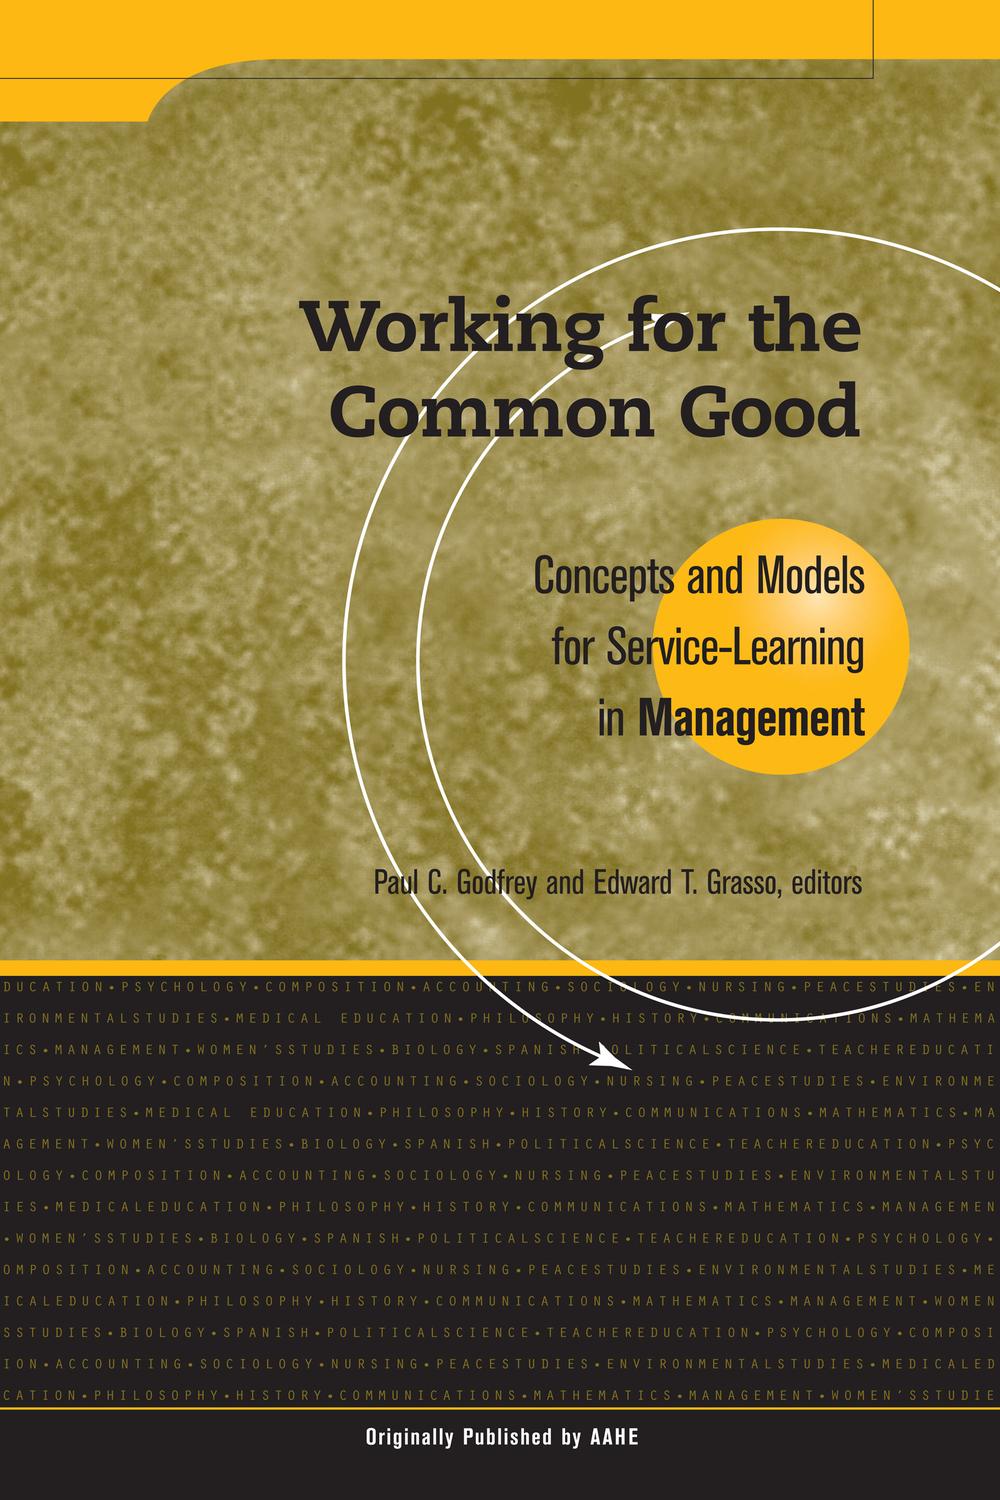 Working for the Common Good - Paul C. Godfrey, Edward T. Grasso